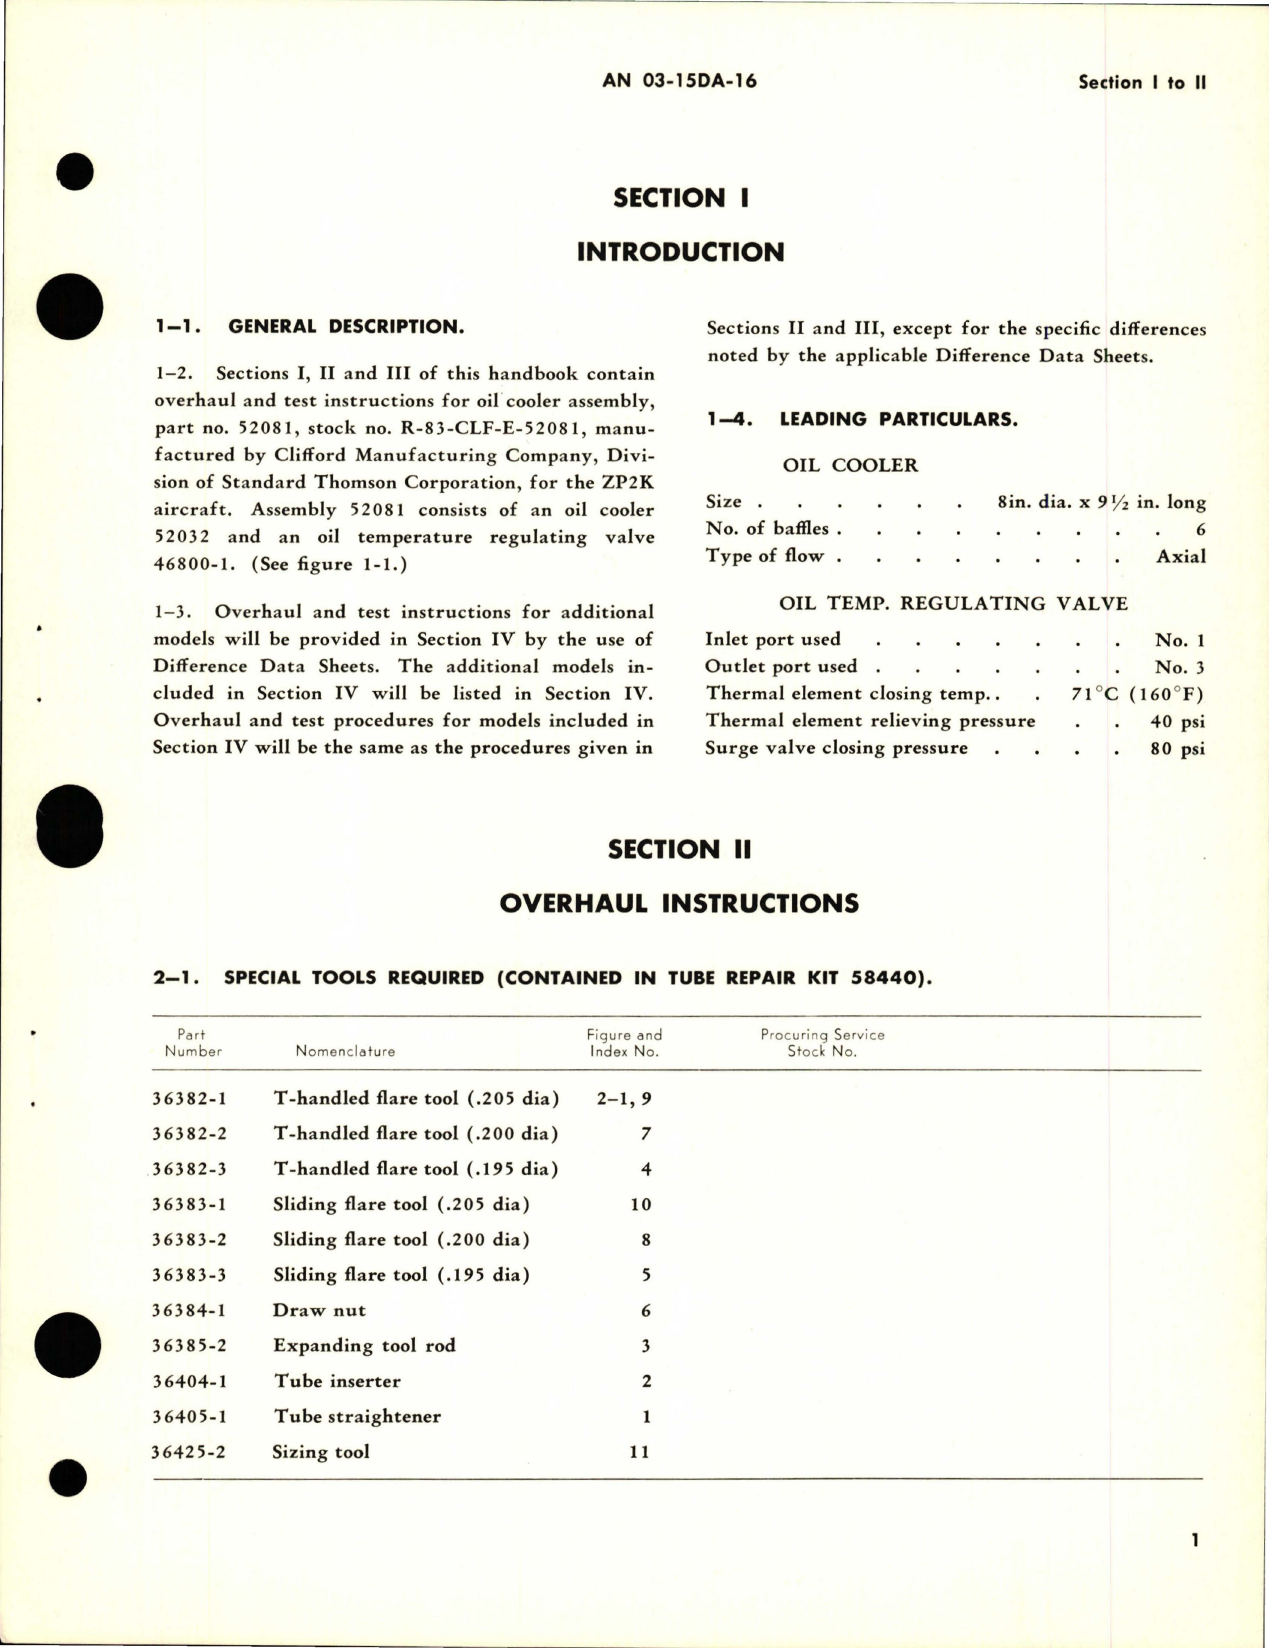 Sample page 5 from AirCorps Library document: Overhaul Instructions for Oil Cooler Assembly - Part 52081